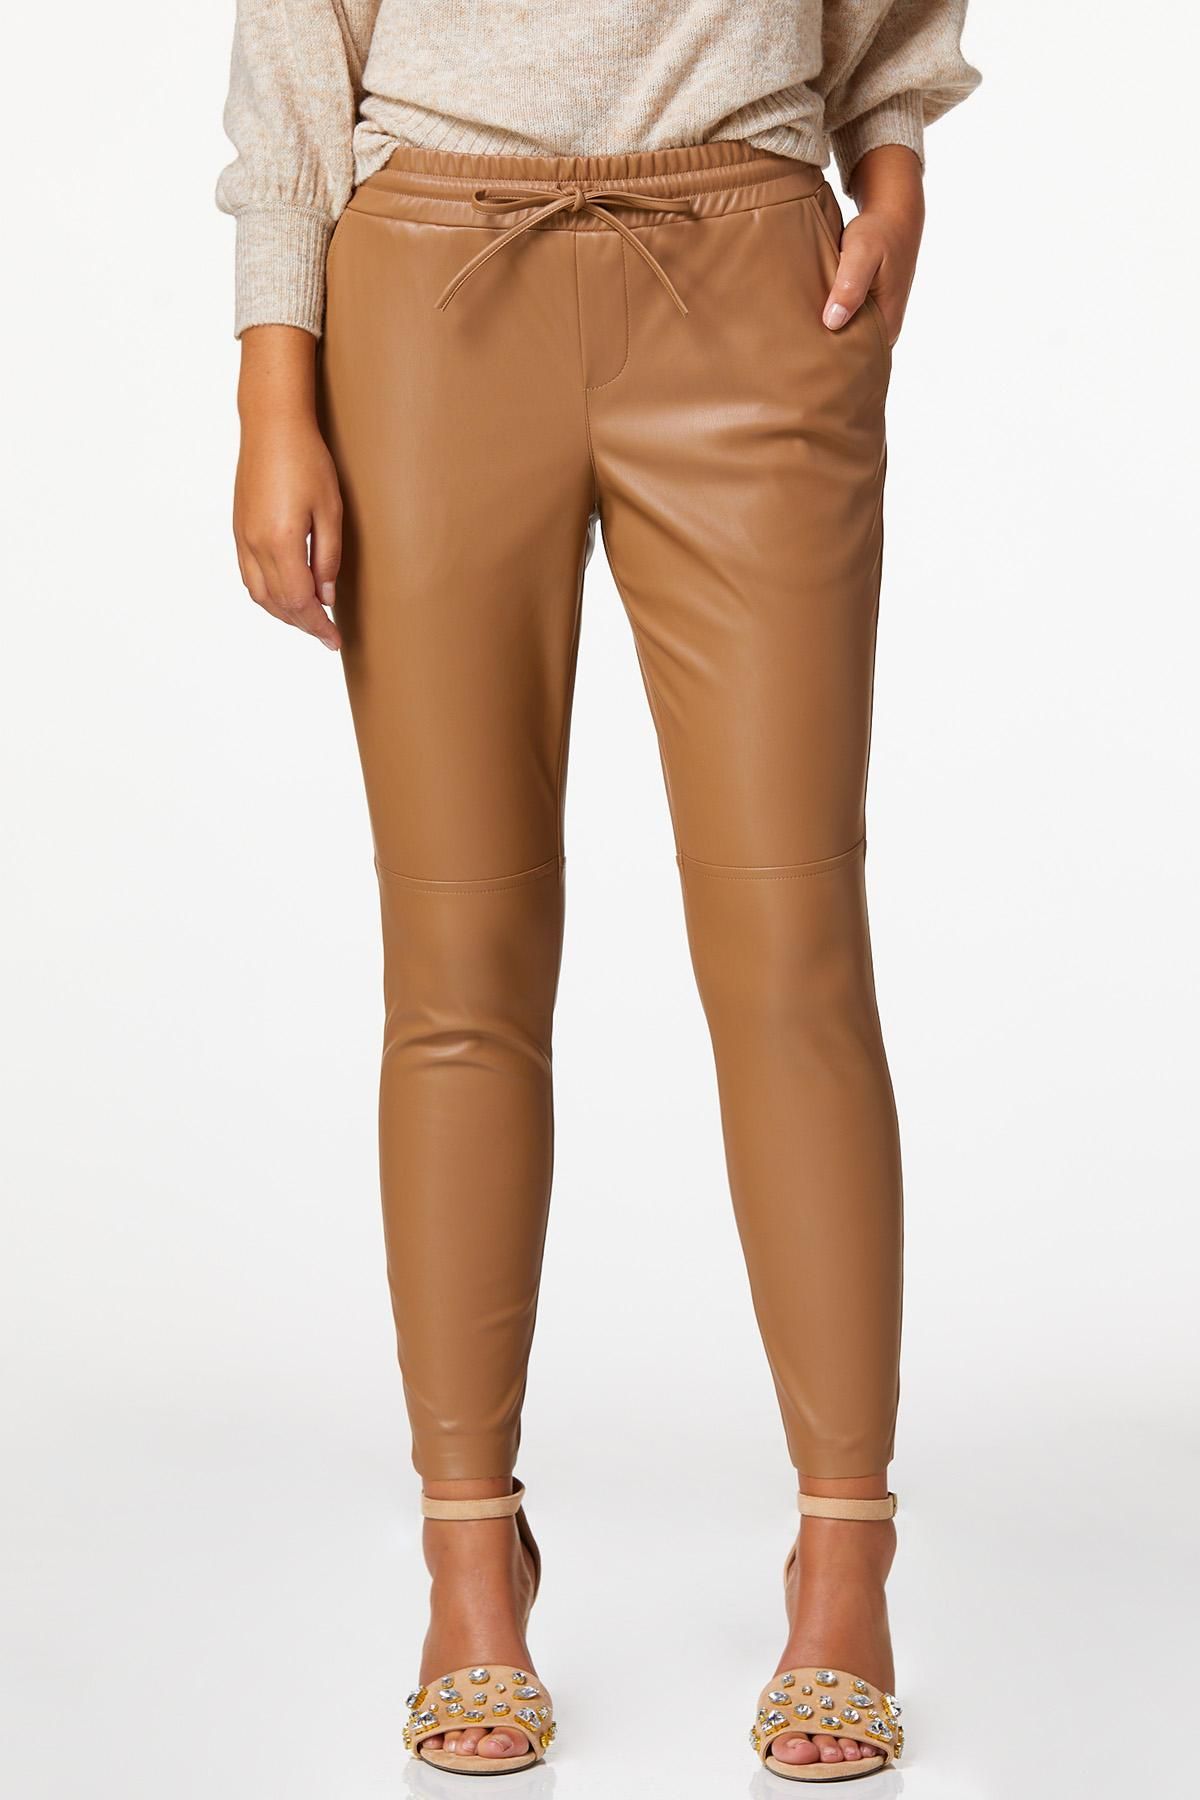 Slim Faux Leather Pants | Cato Fashions